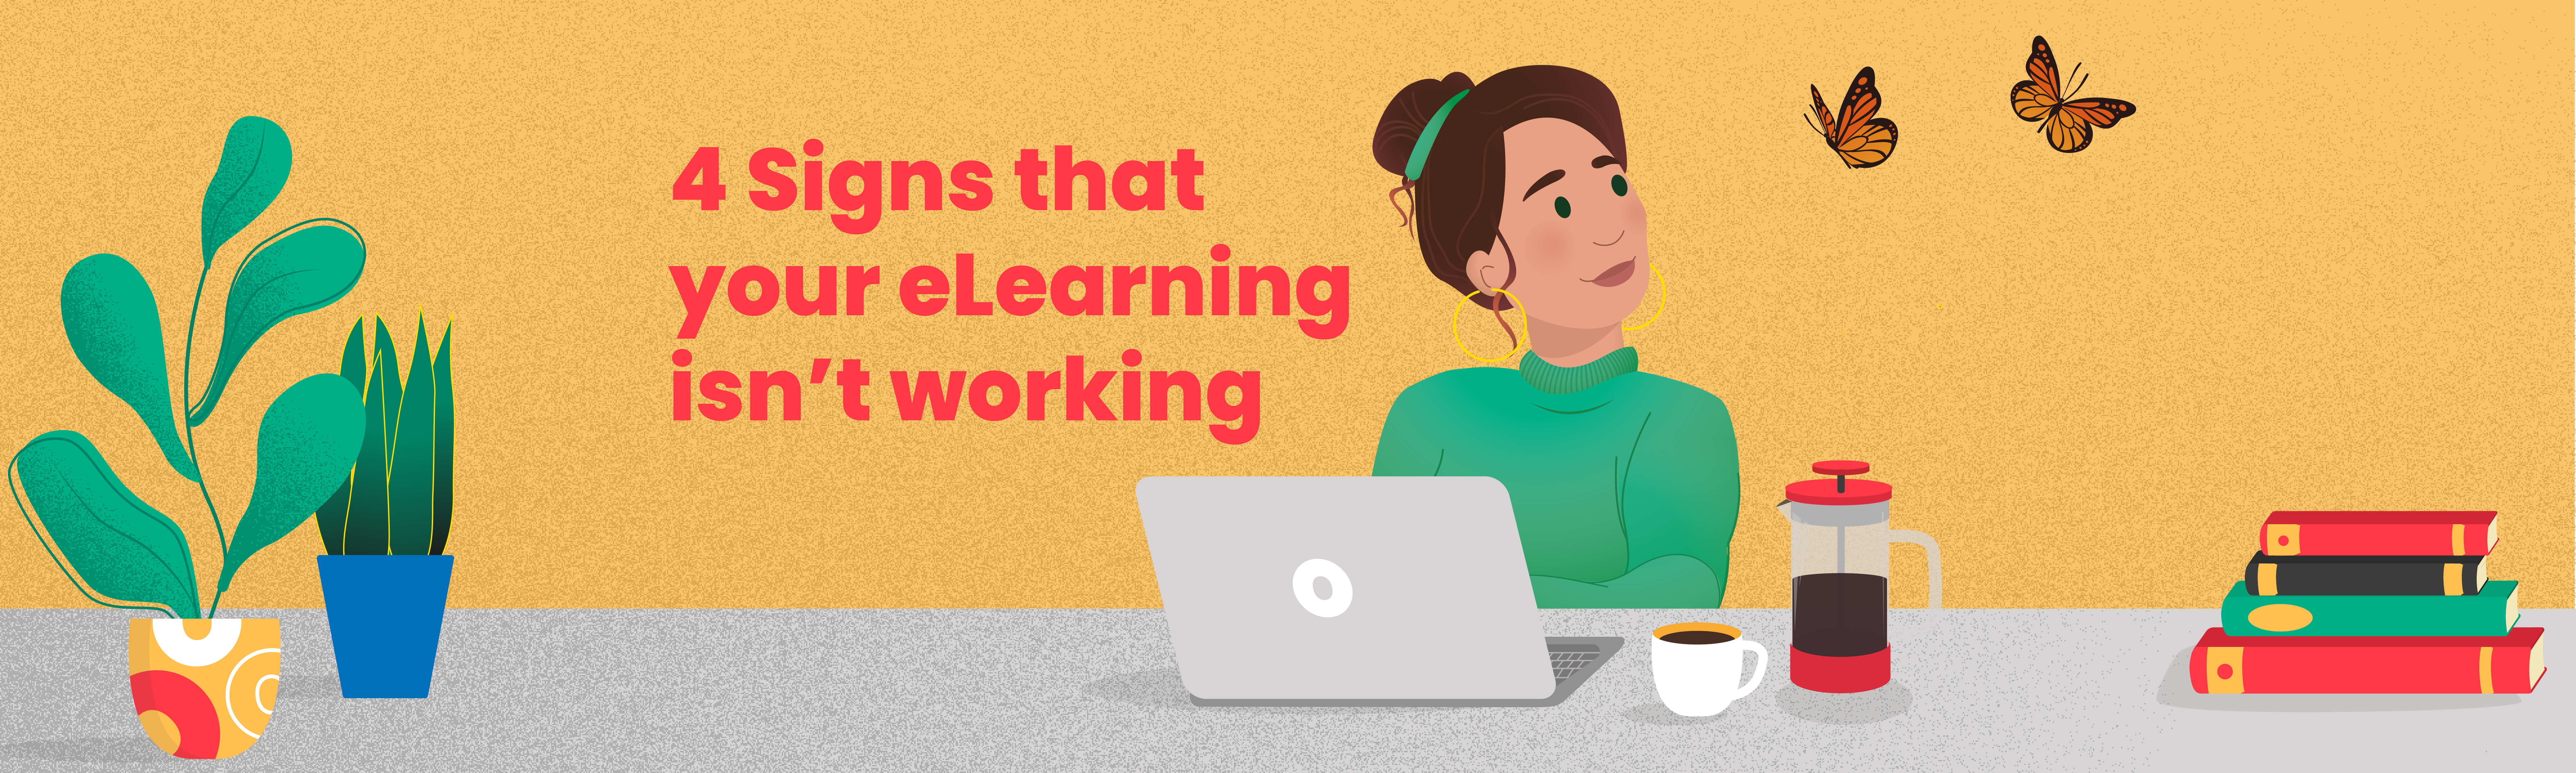 4 signs your eLearning isn't working